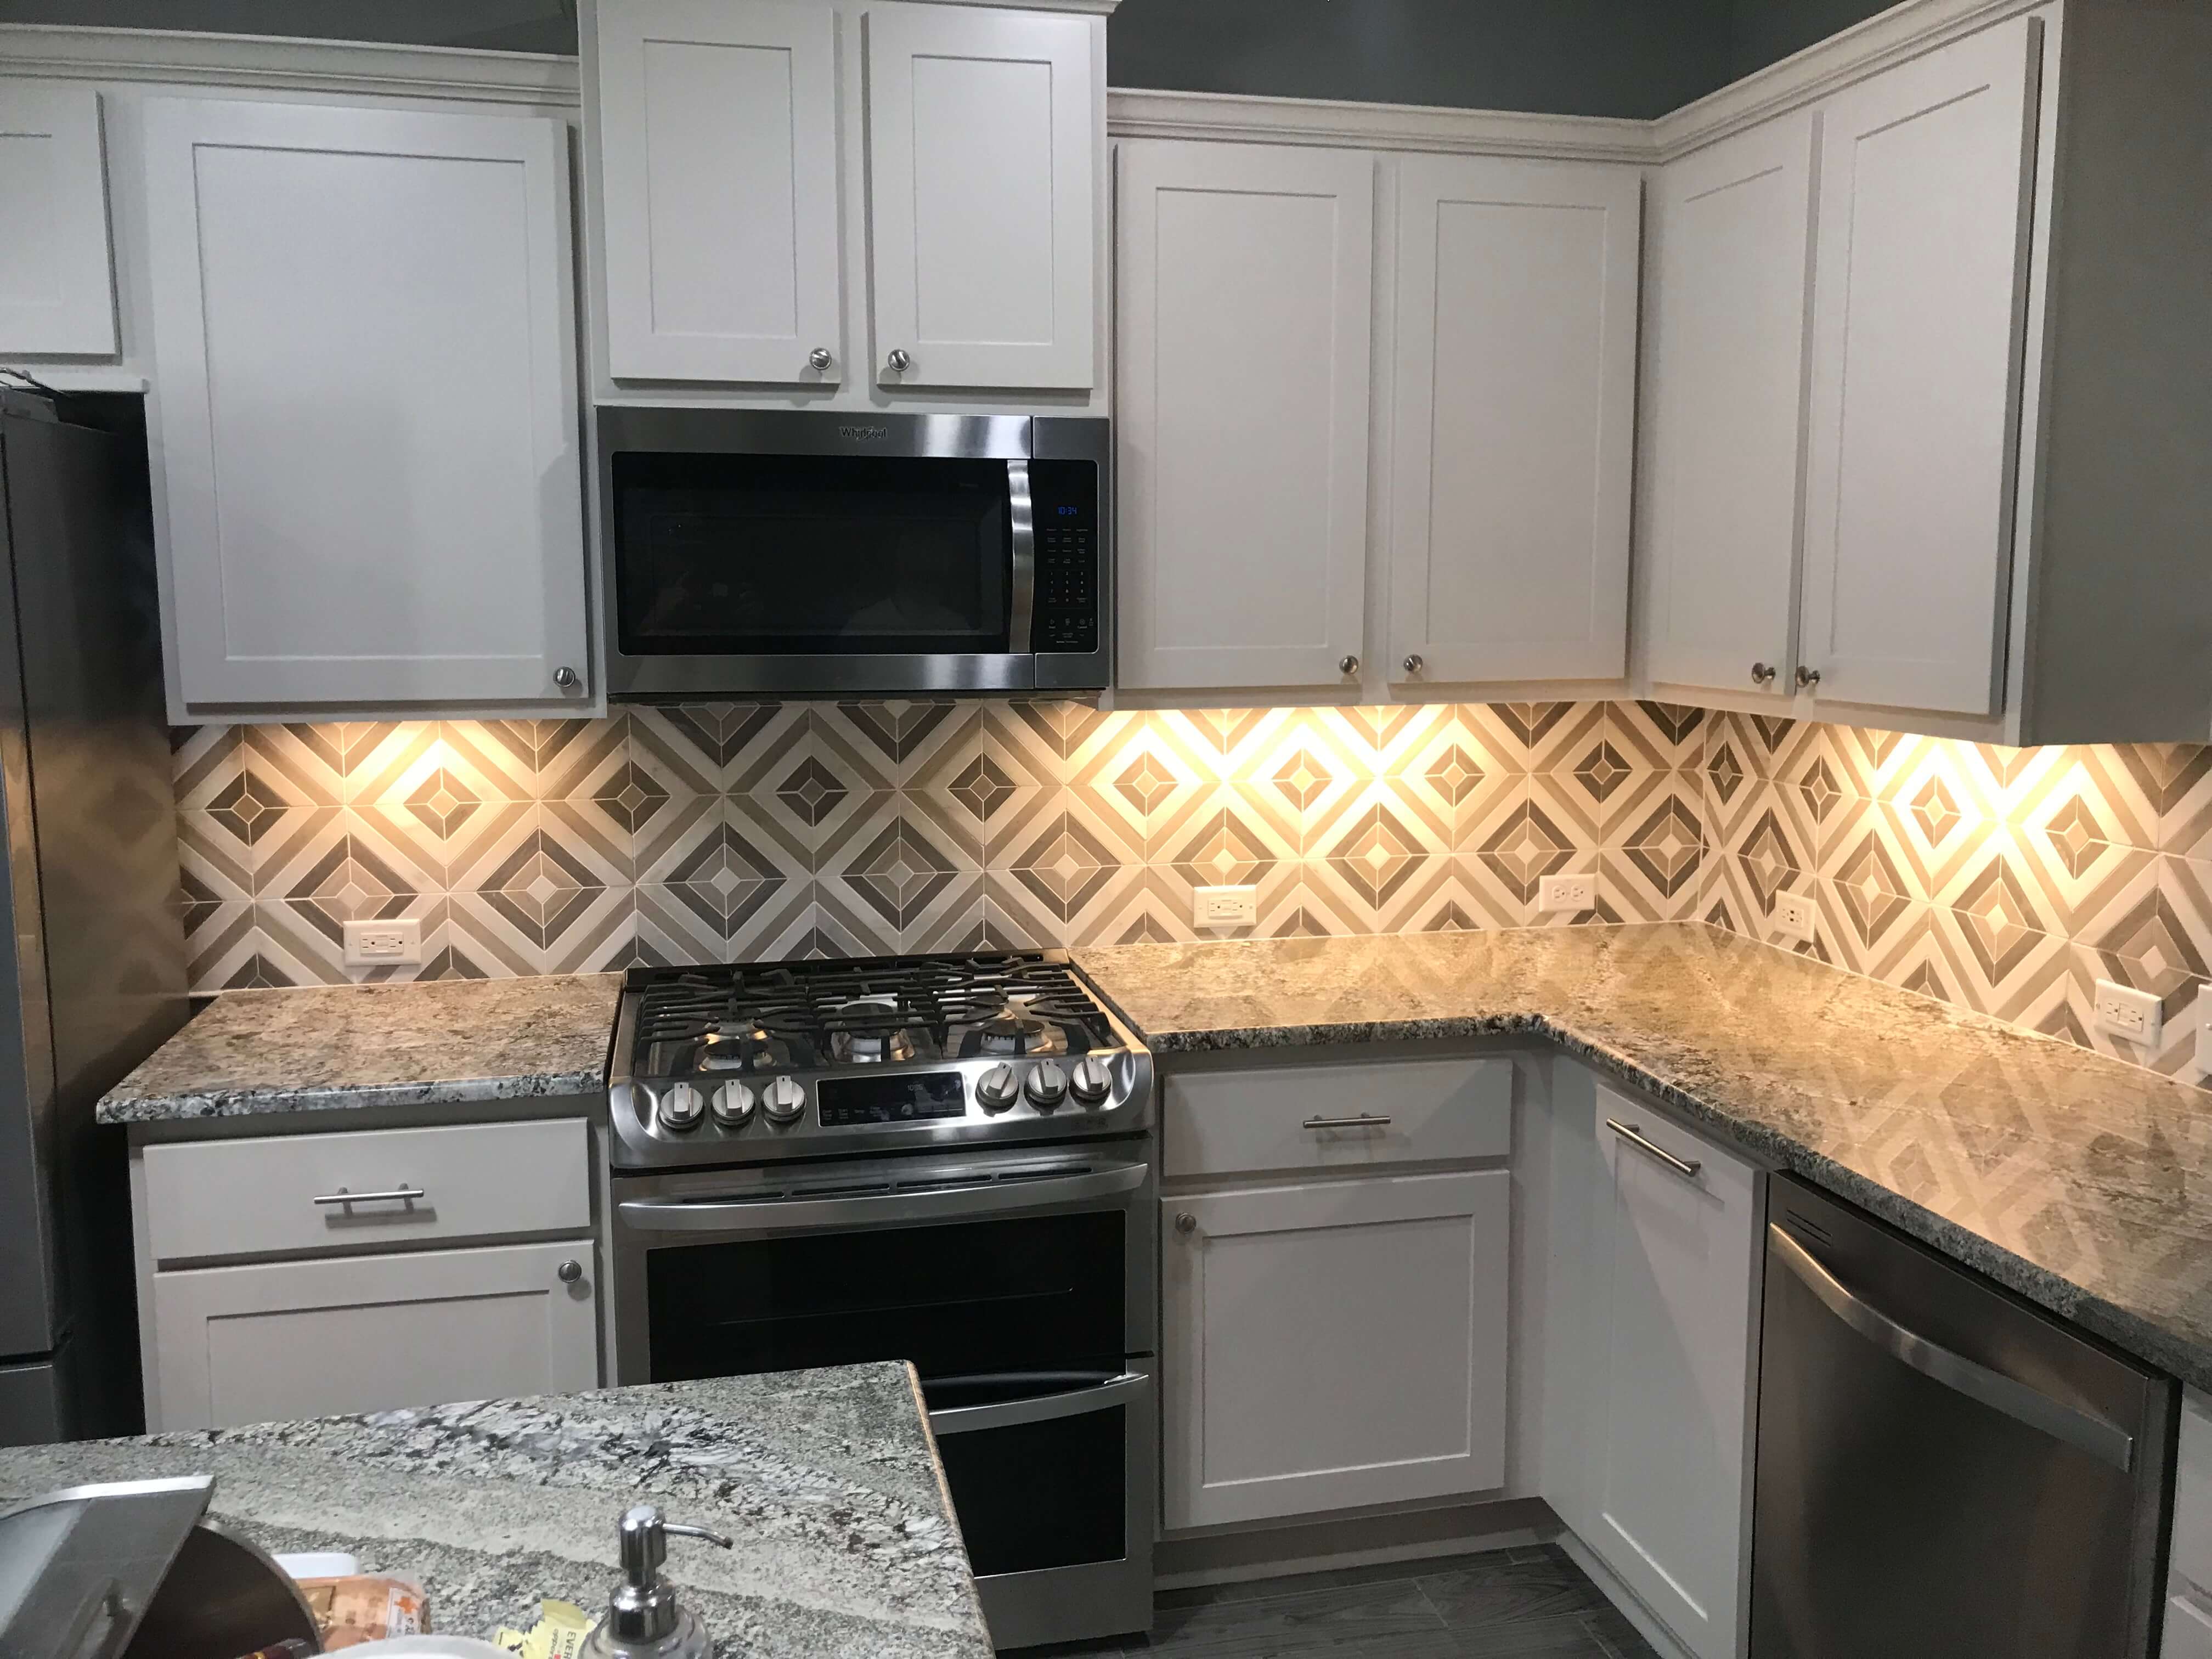 Best Kitchen Backsplash Installer In Central Texas, Serving San Marcos, Texas and Surrounding Cities